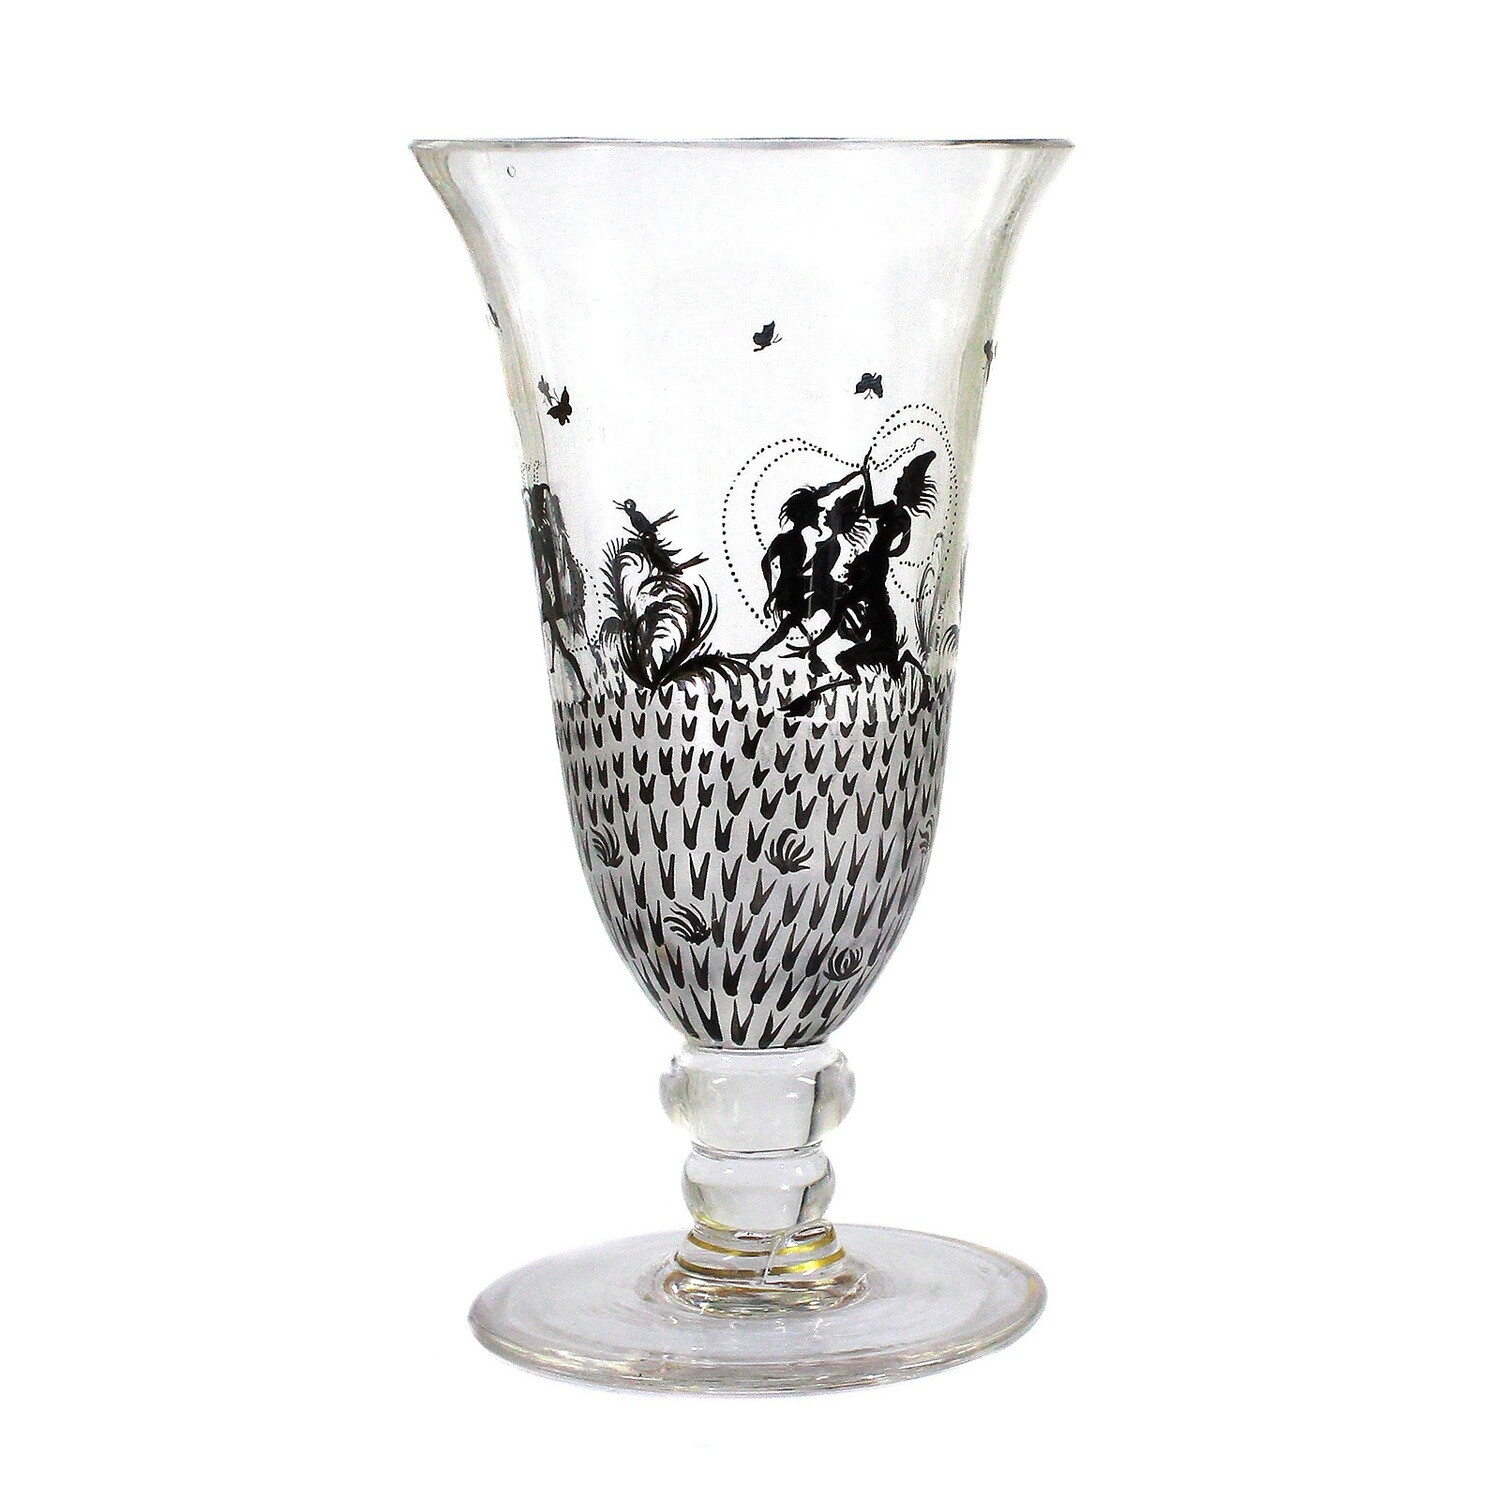 Cup made of colorless glass with a silhouette, Steinschönau Glass School